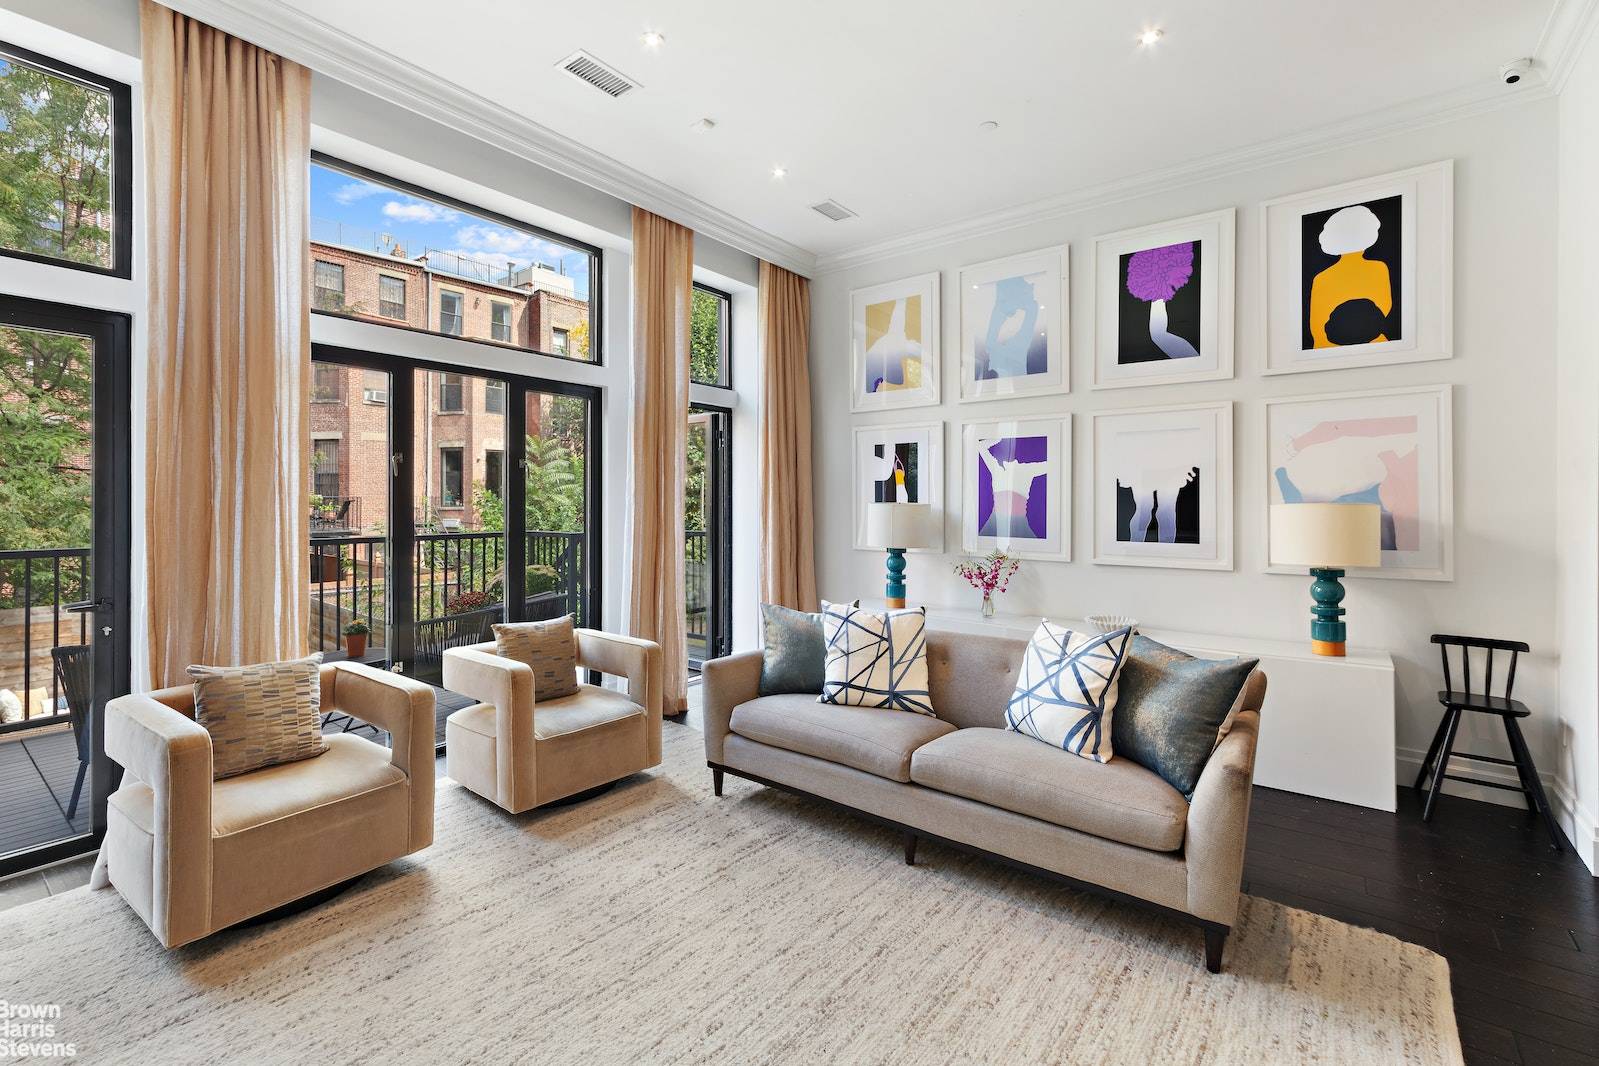 A truly spectacular custom townhouse on one of Harlem's most desirable blocks.